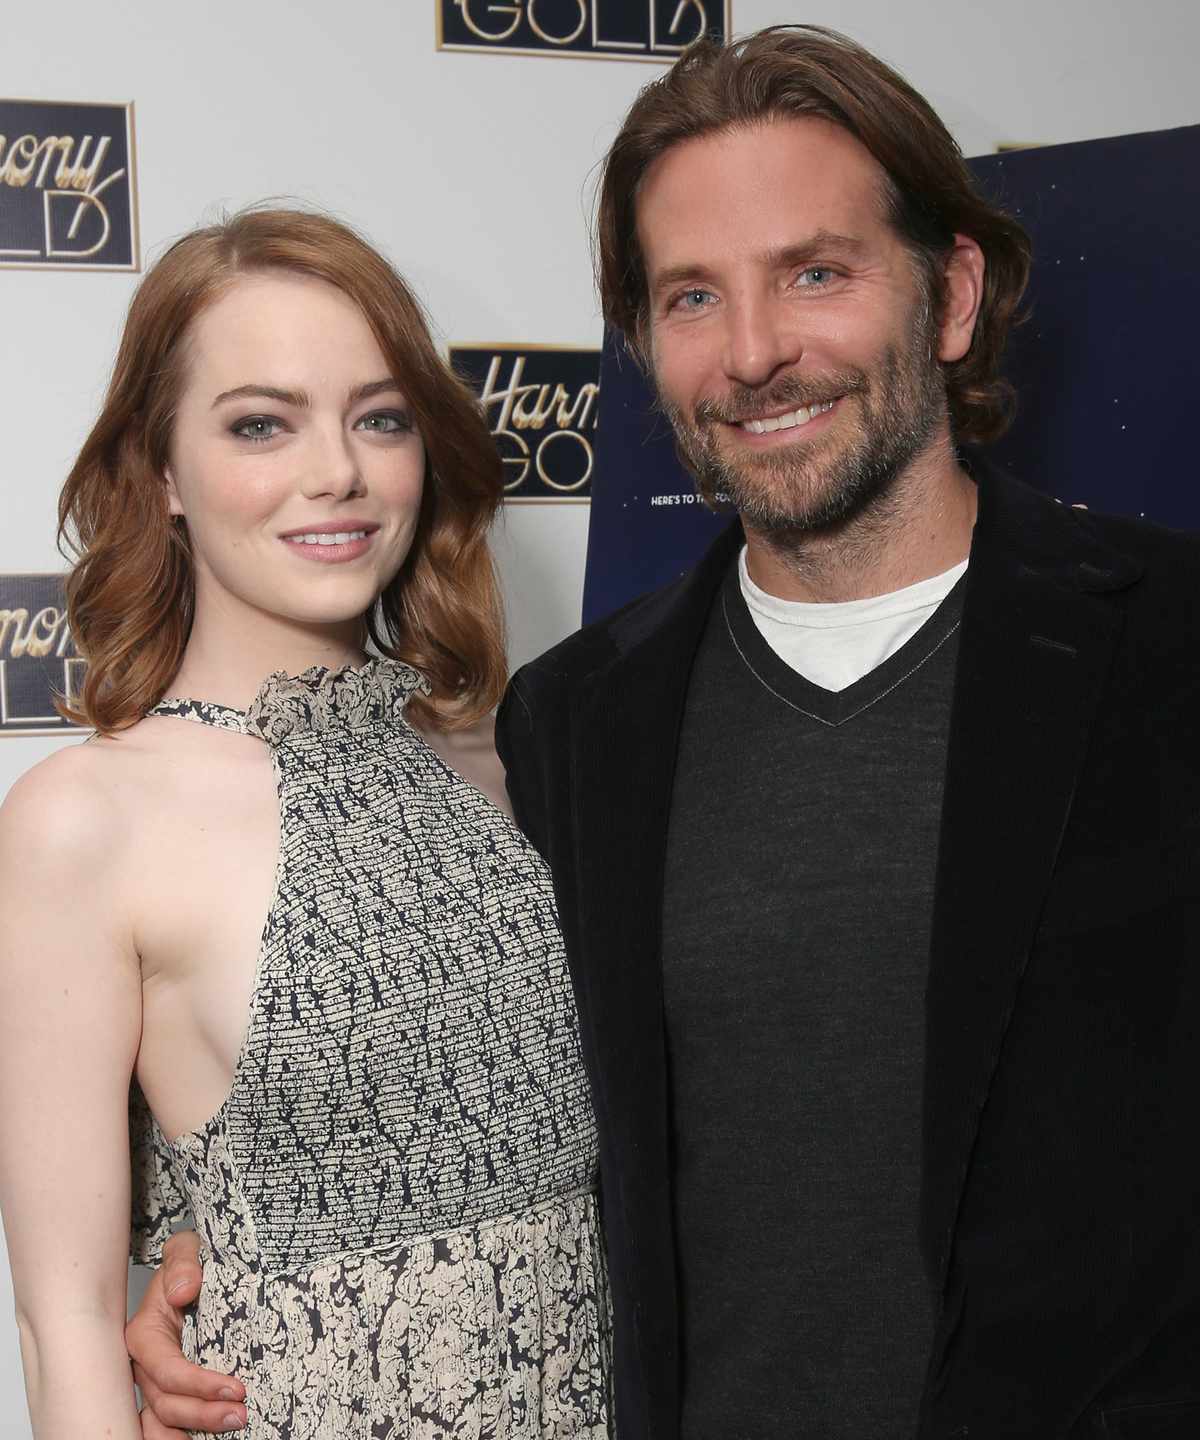 Bradley Cooper (right) hosts a Special Screening of Lionsgate's LA LA LAND with Emma Stone on November 21, 2016 in Los Angeles, California.